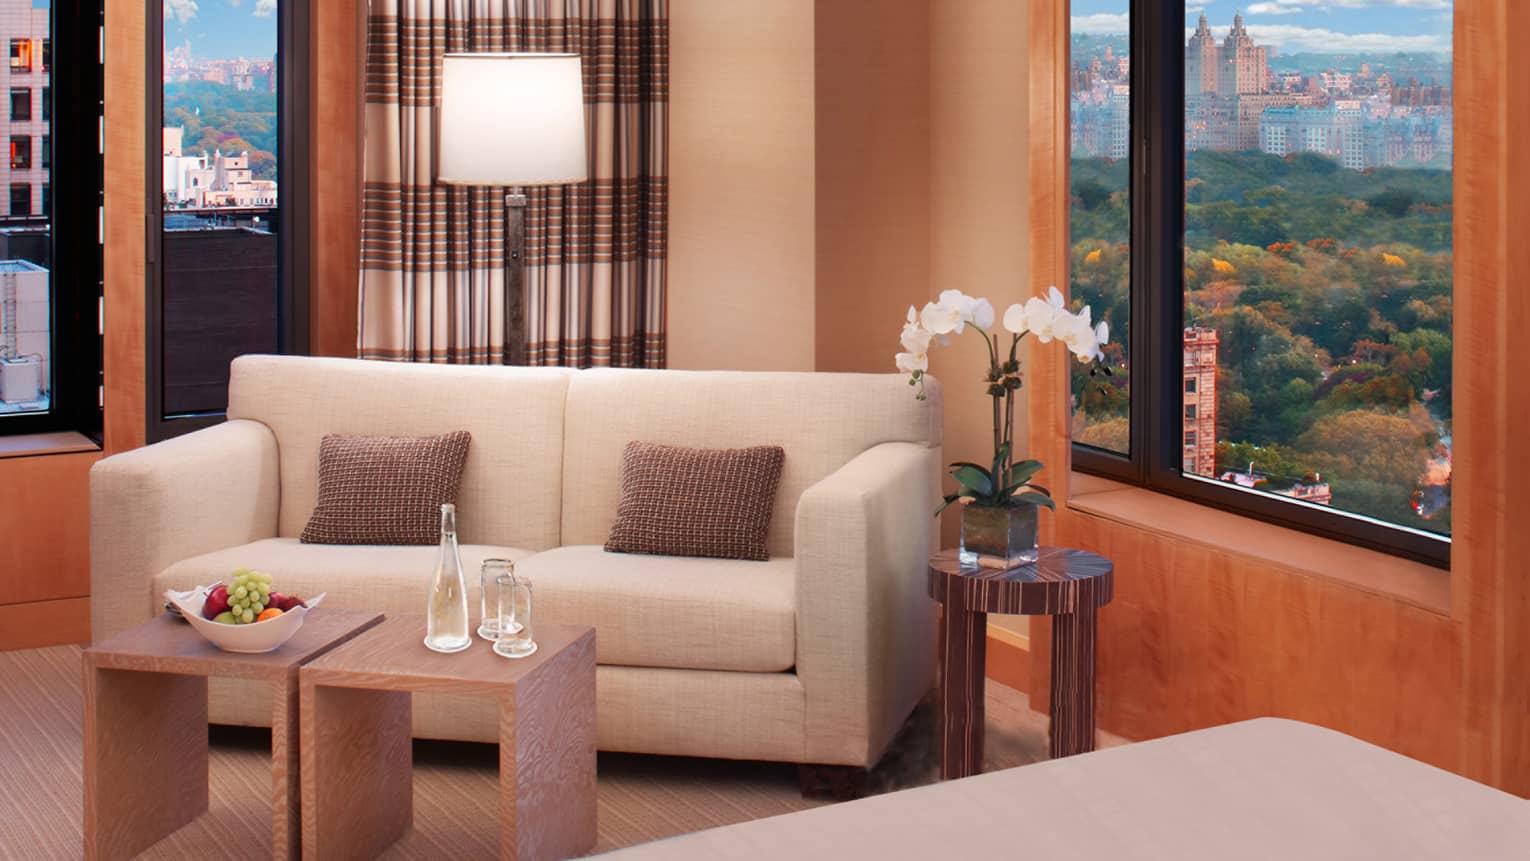 Corner suite with white loveseat sofa, small modern tables with fresh fruit, water, white orchid